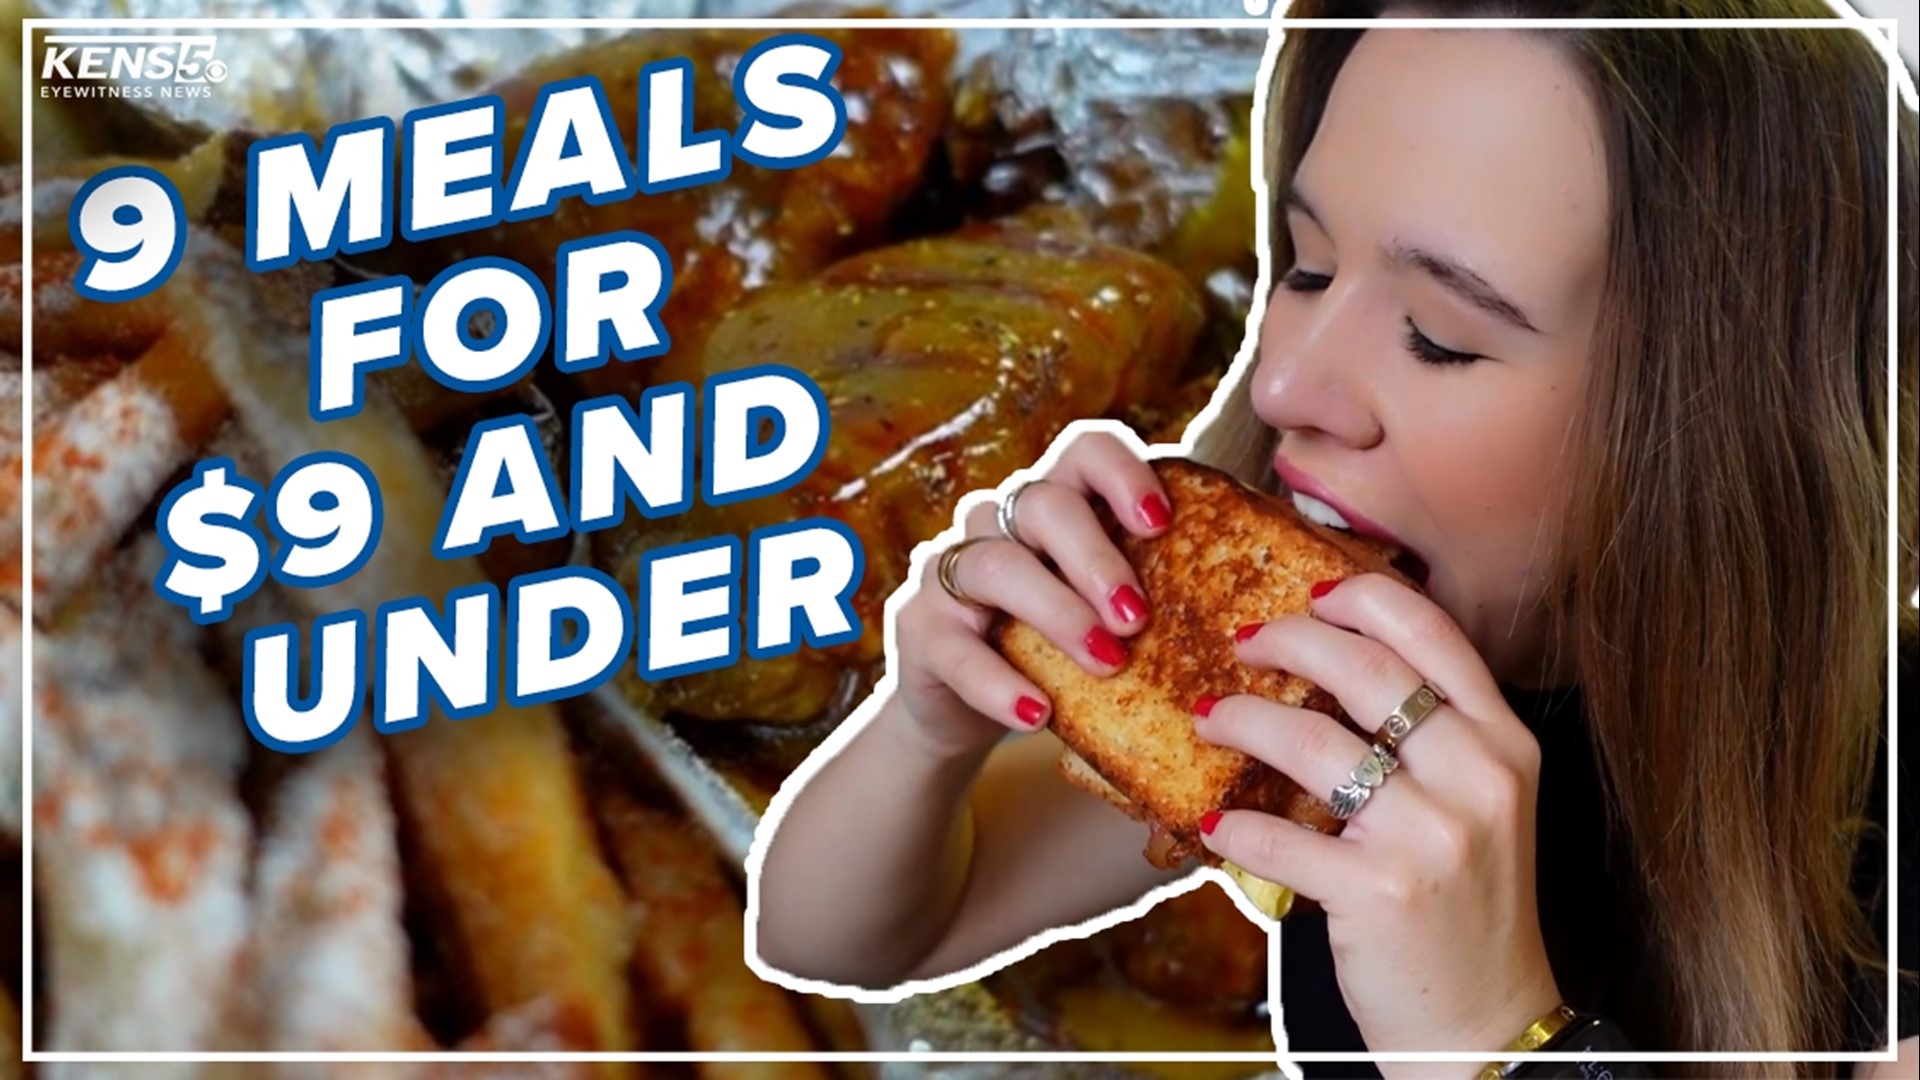 KENS 5's Lexi Hazlett takes you to nine local restaurants with meals for $9 and under!